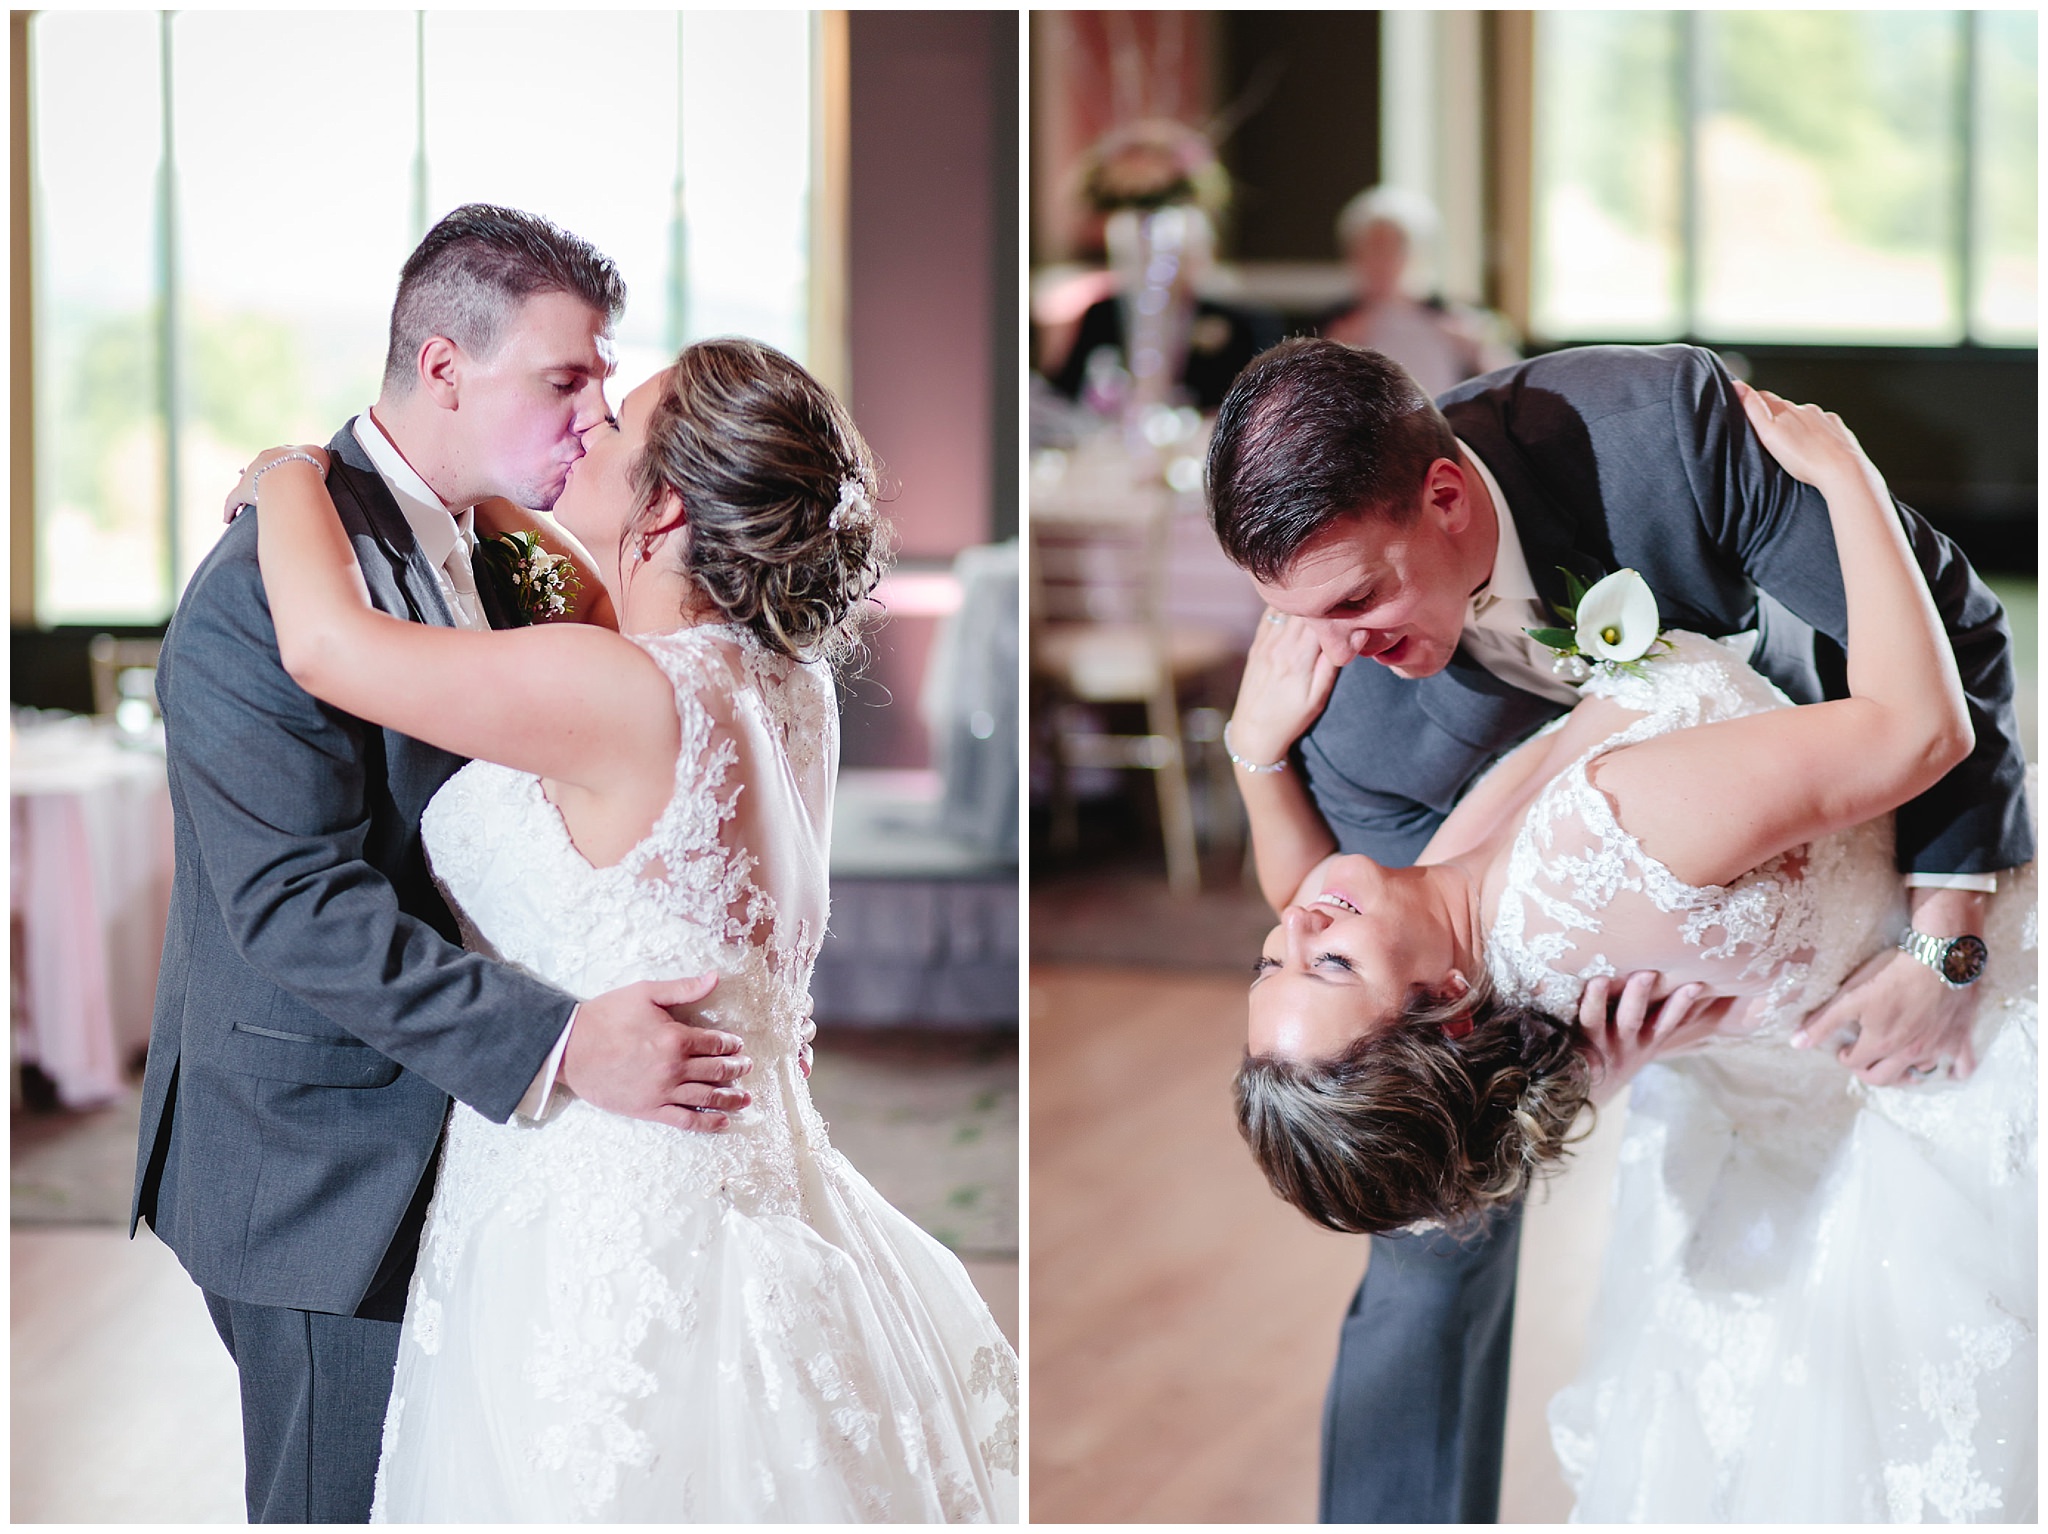 Newlyweds kiss and dip during their first dance